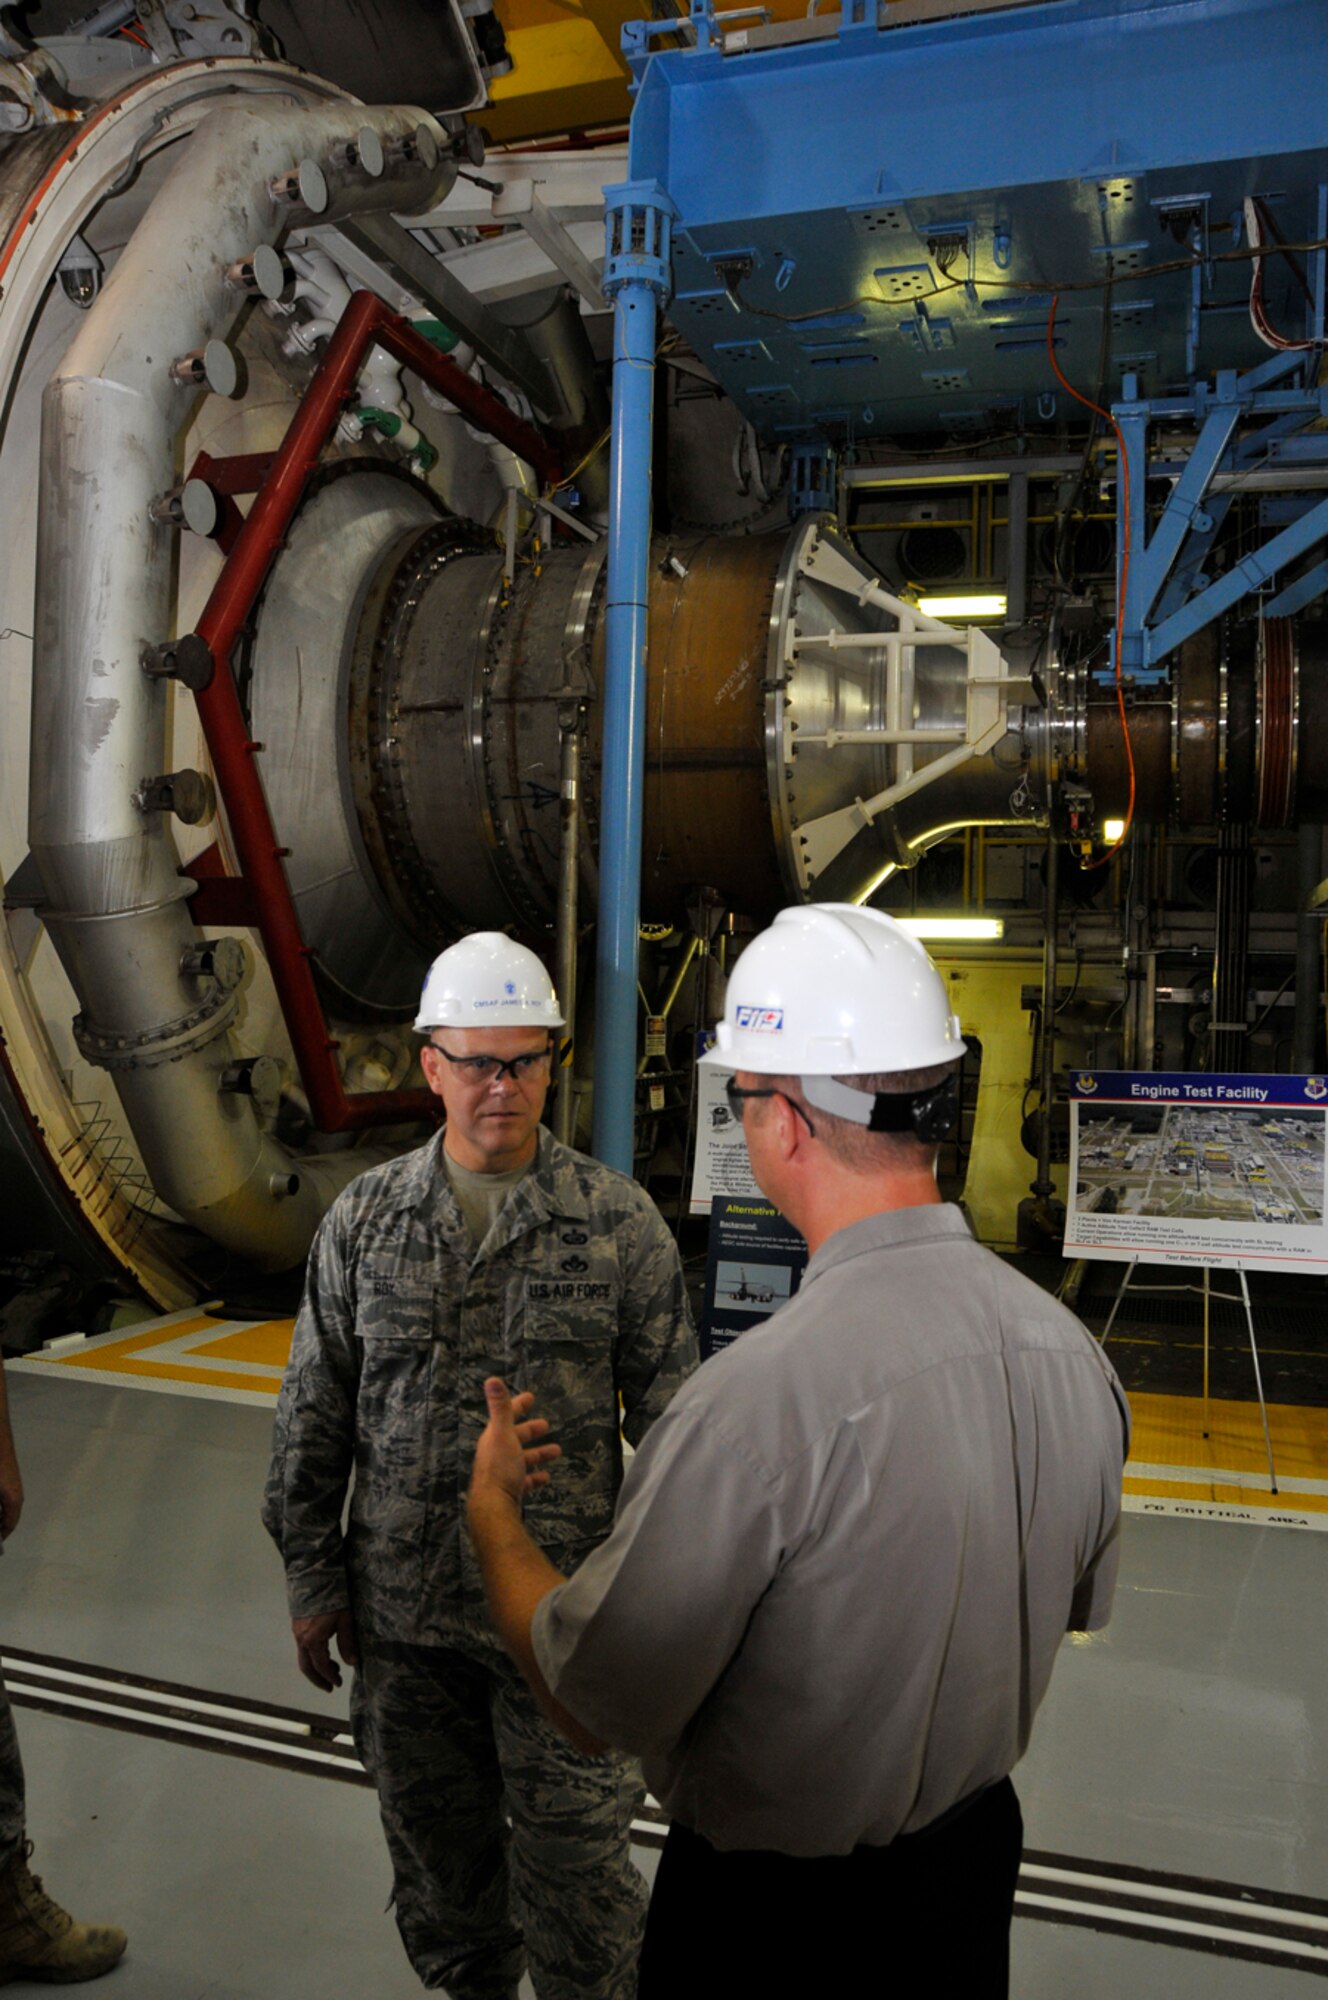 Chief Master Sgt. of the Air Force James Roy, left, learns about AEDC’s Aeropropulsion Systems Test Facility from John Kelly, an aeropropulsion project manager, and one of the base’s few U.S. Navy civilian employees. Chief Roy and his wife visited the base July 15. The chief represents the highest enlisted level of leadership in the Air Force and represents the interests of the enlisted force. (Photo by Rick Goodfriend)